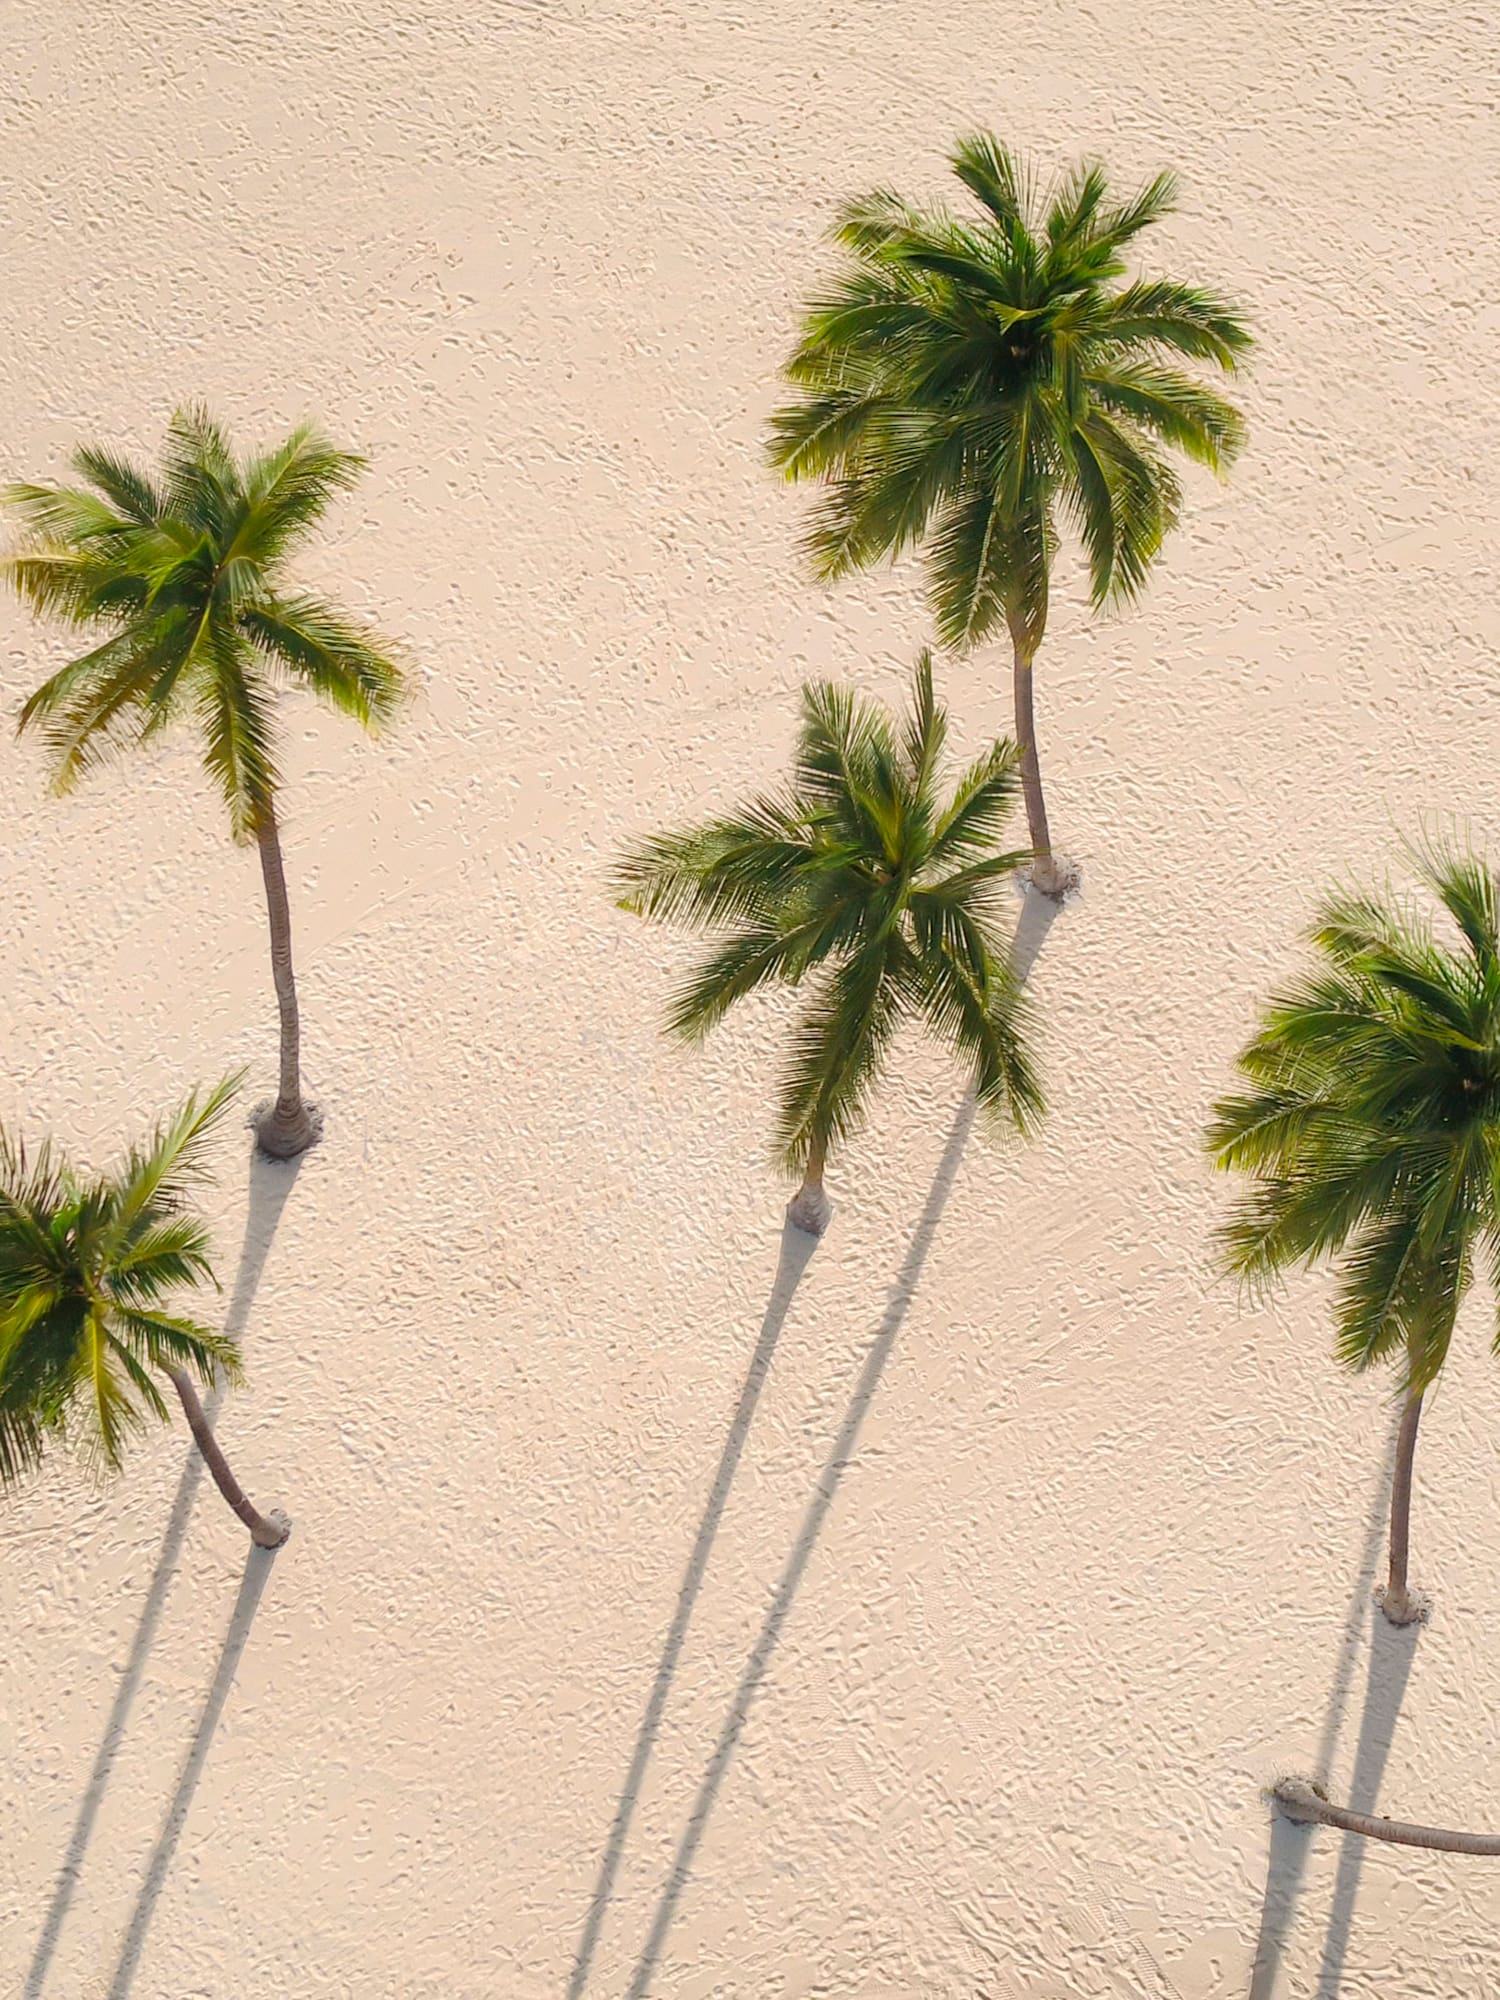 a group of palm trees on a beach